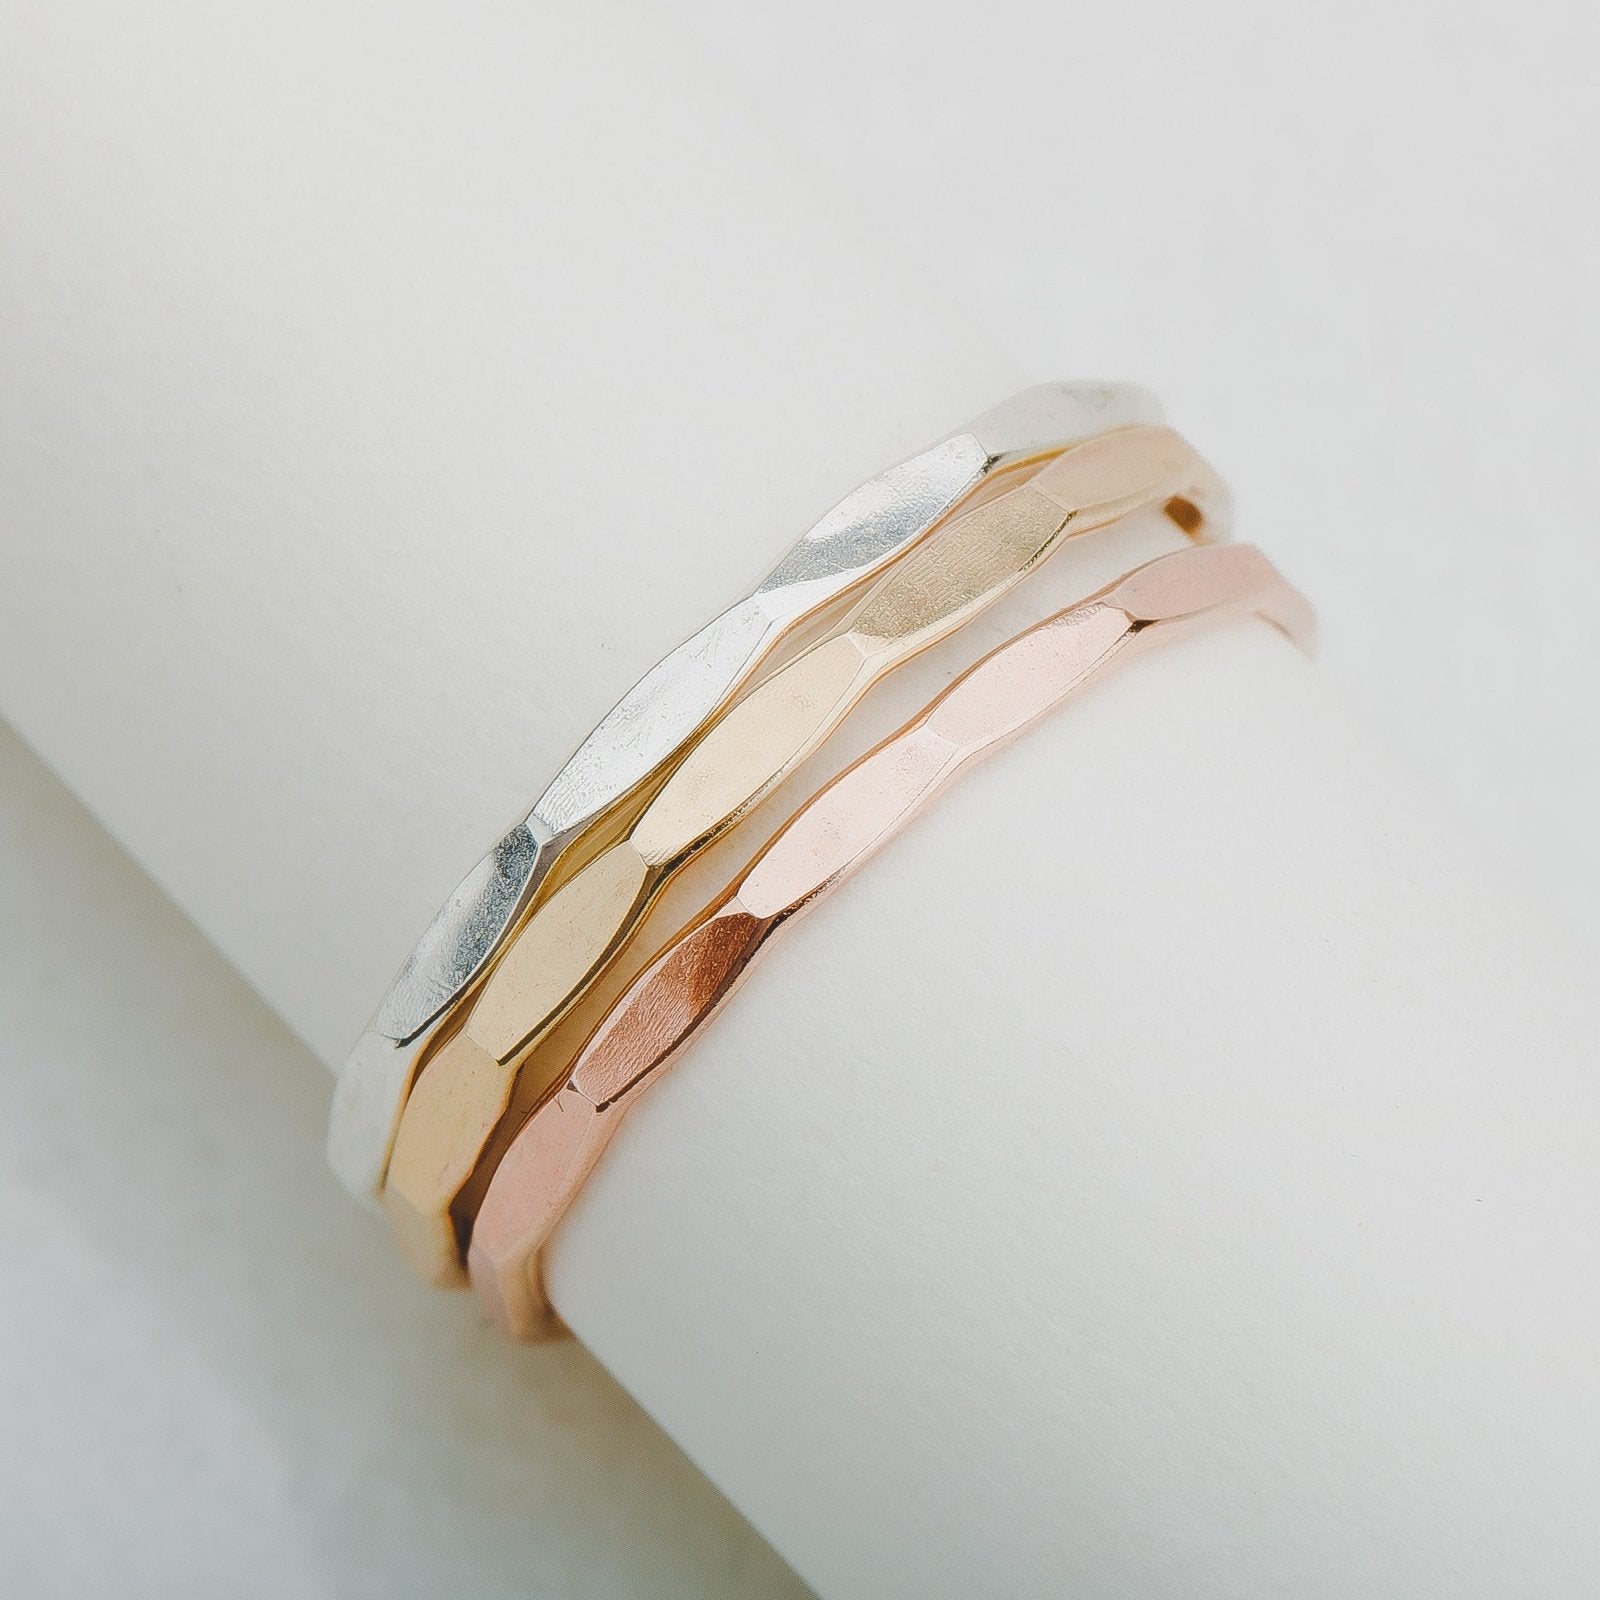 Mirror Hammered Stacking Ring - Melanie Golden Jewelry - rings, stacking rings